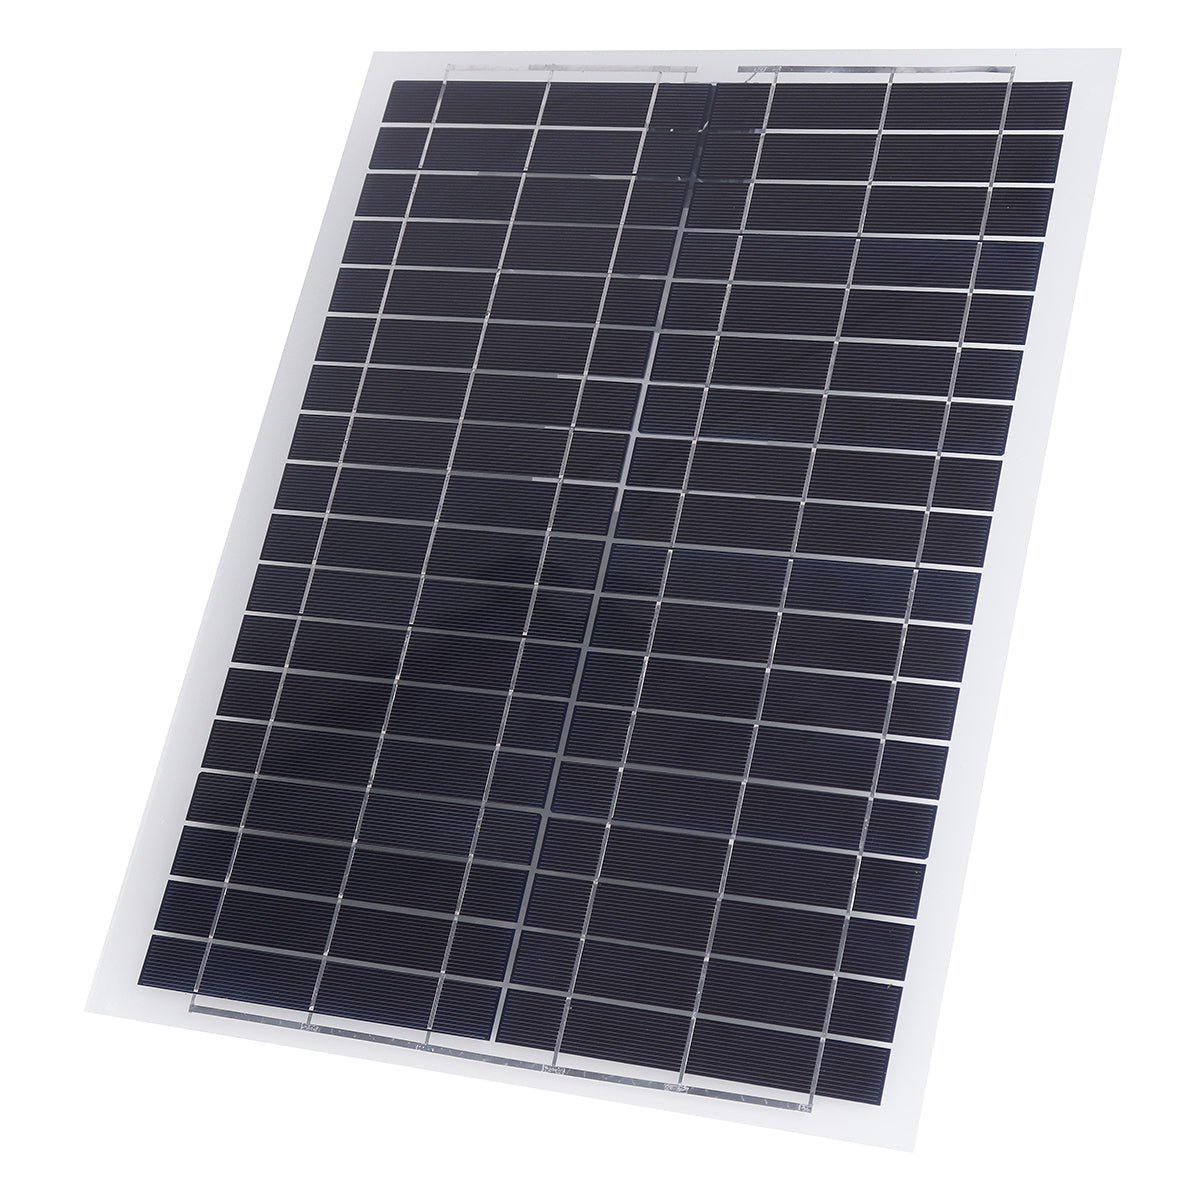 Solar Panel 50W Poly-crystalline with controller - The Shopsite